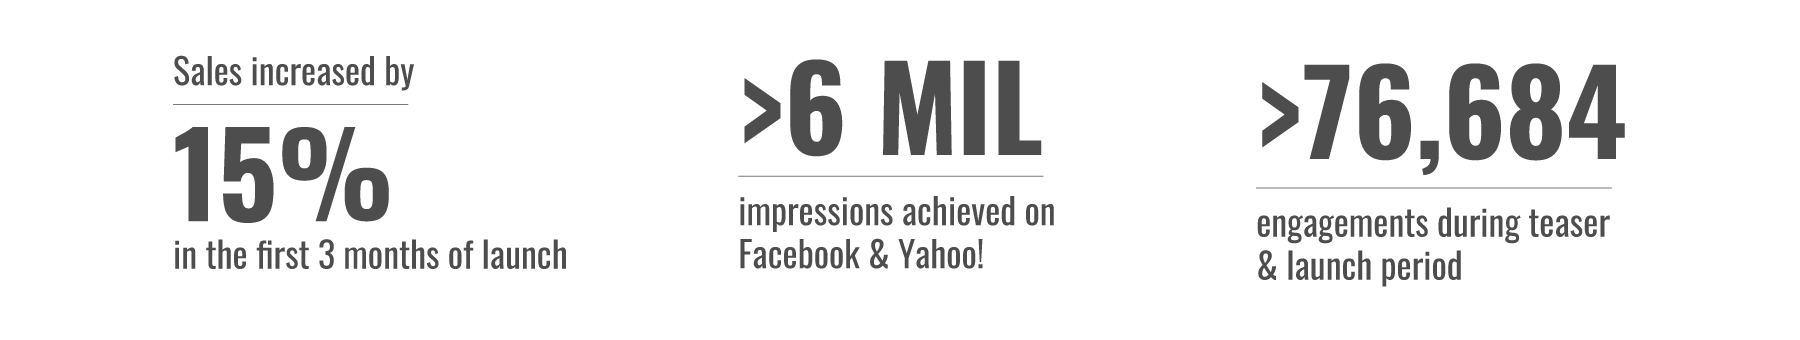 Sales increased by 15% in the first 3 months of launch | >6 MIL impresions achieved on Facebook & Yahoo! | >76,684 engagements during teaser & launch period